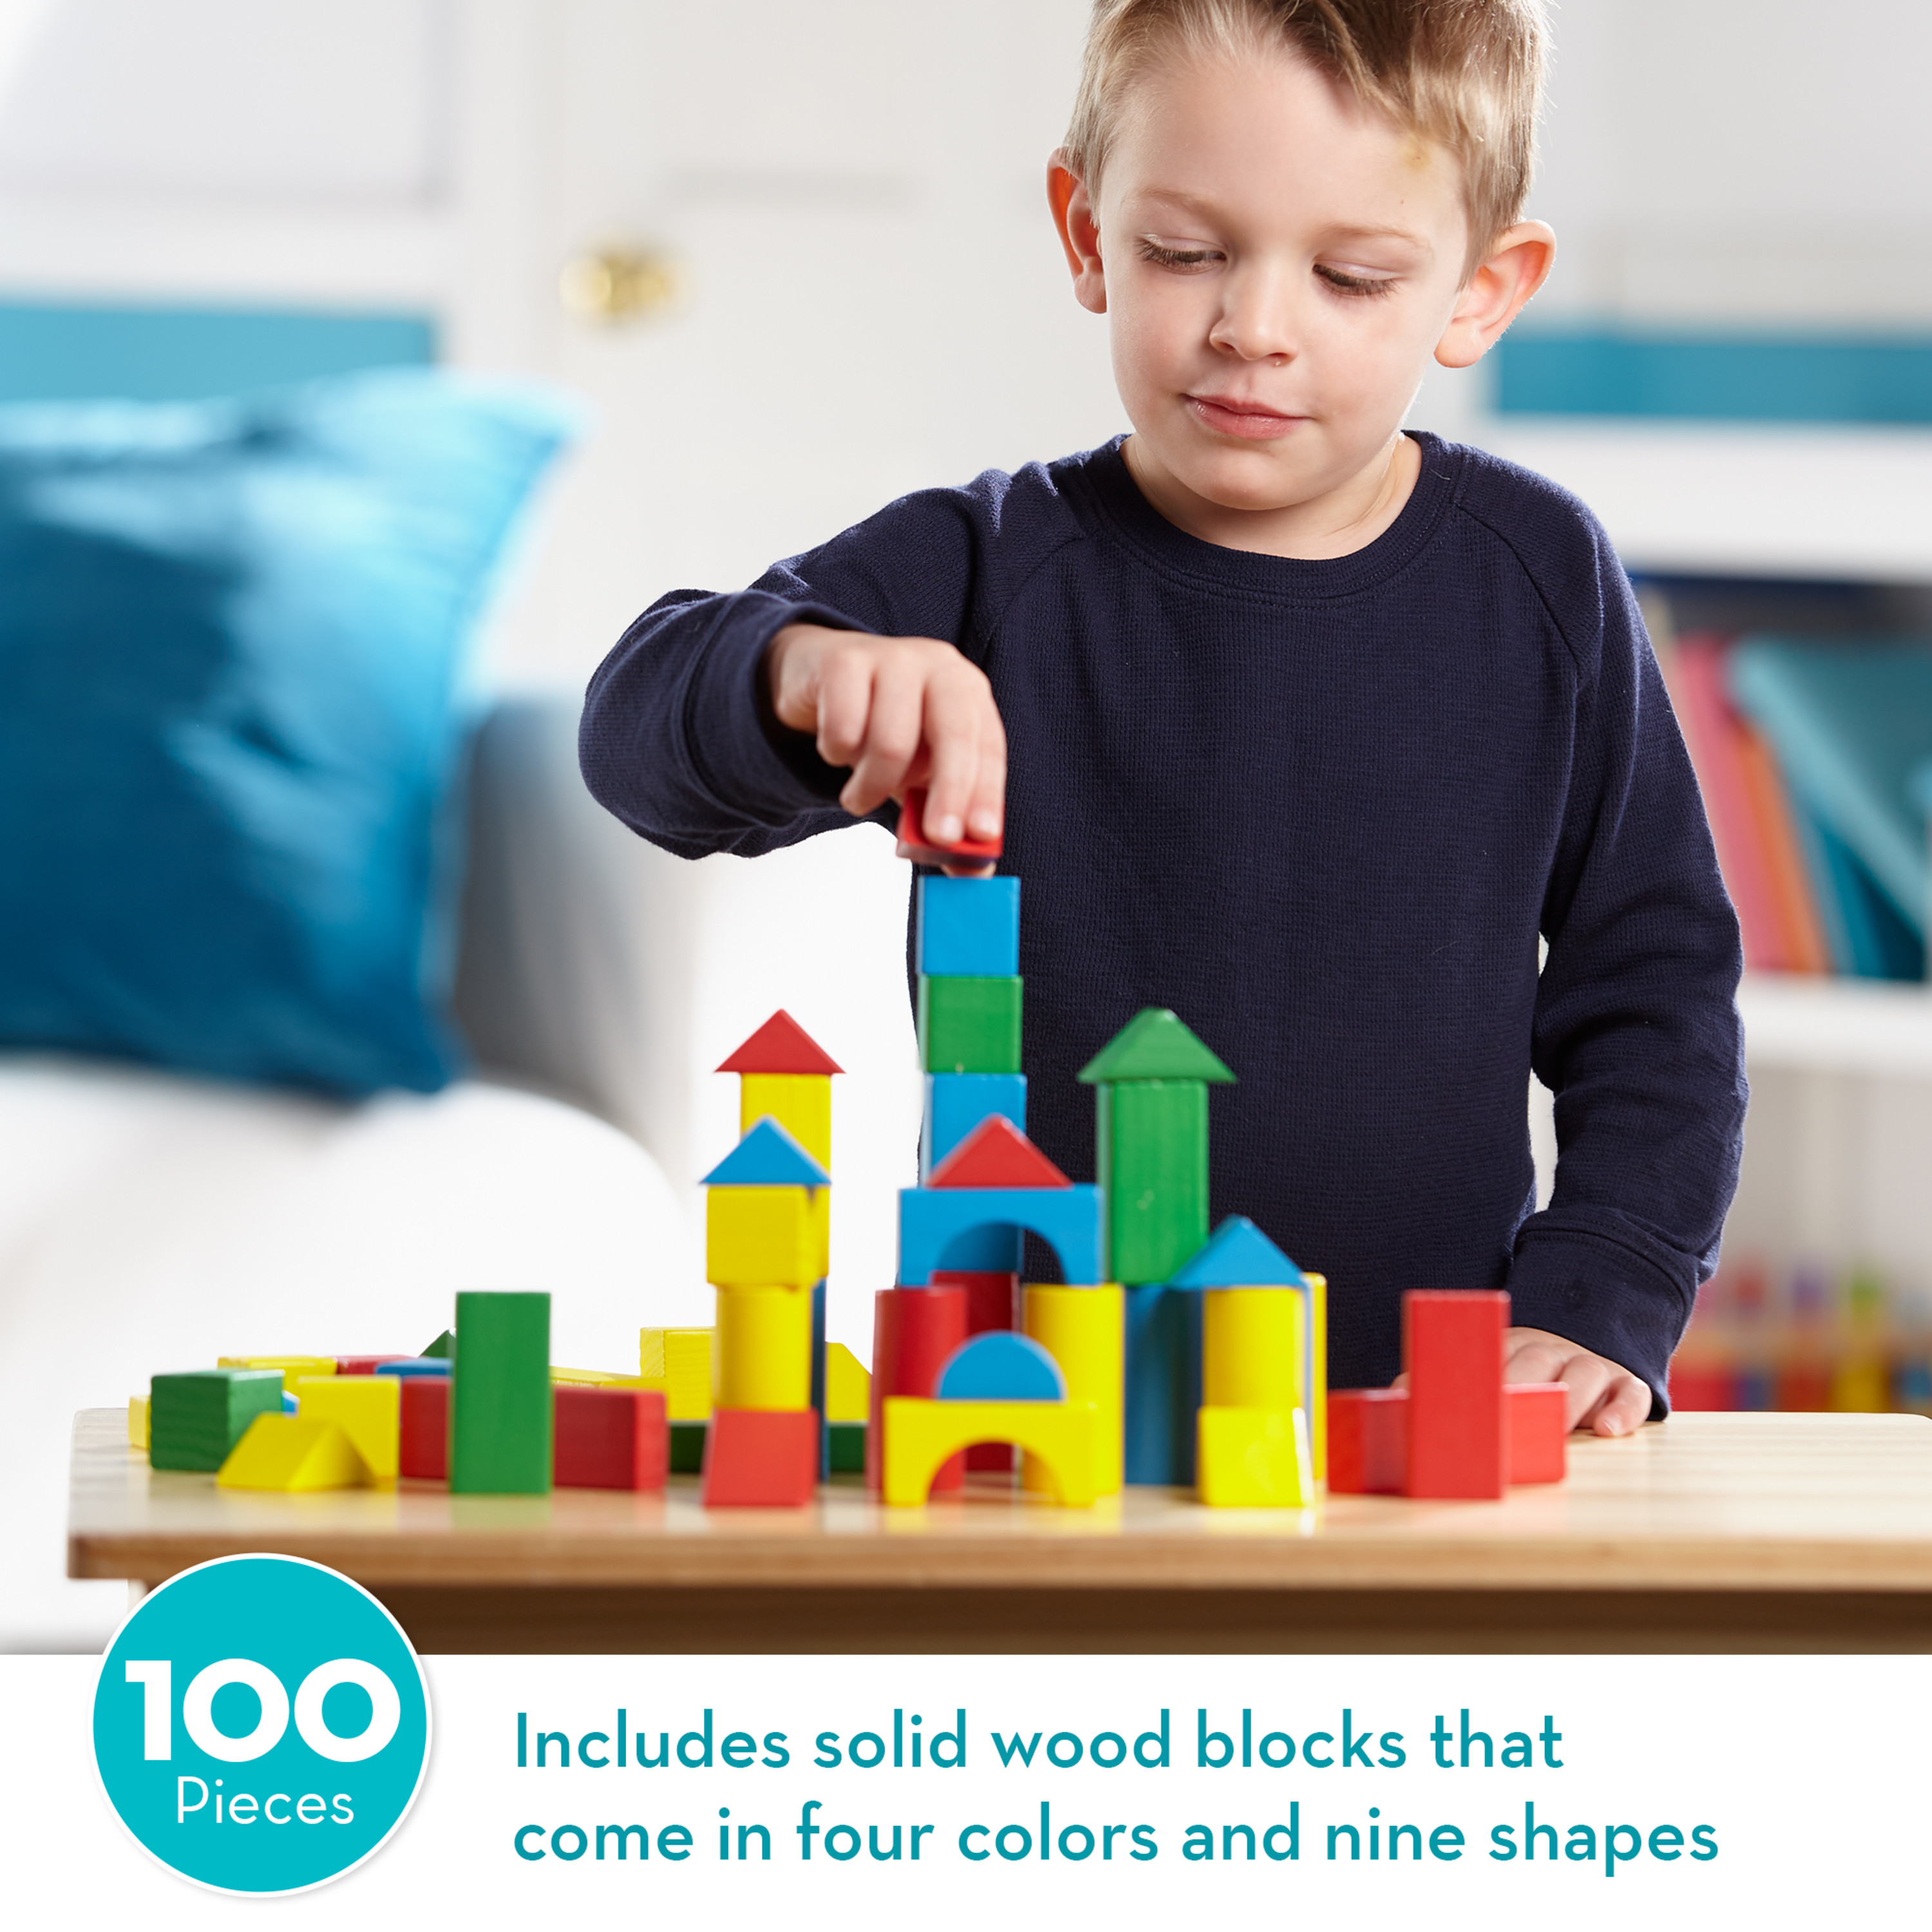 Melissa & Doug Wooden Building Blocks Set - 100 Blocks in 4 Colors and 9 Shapes - FSC Certified - image 4 of 11